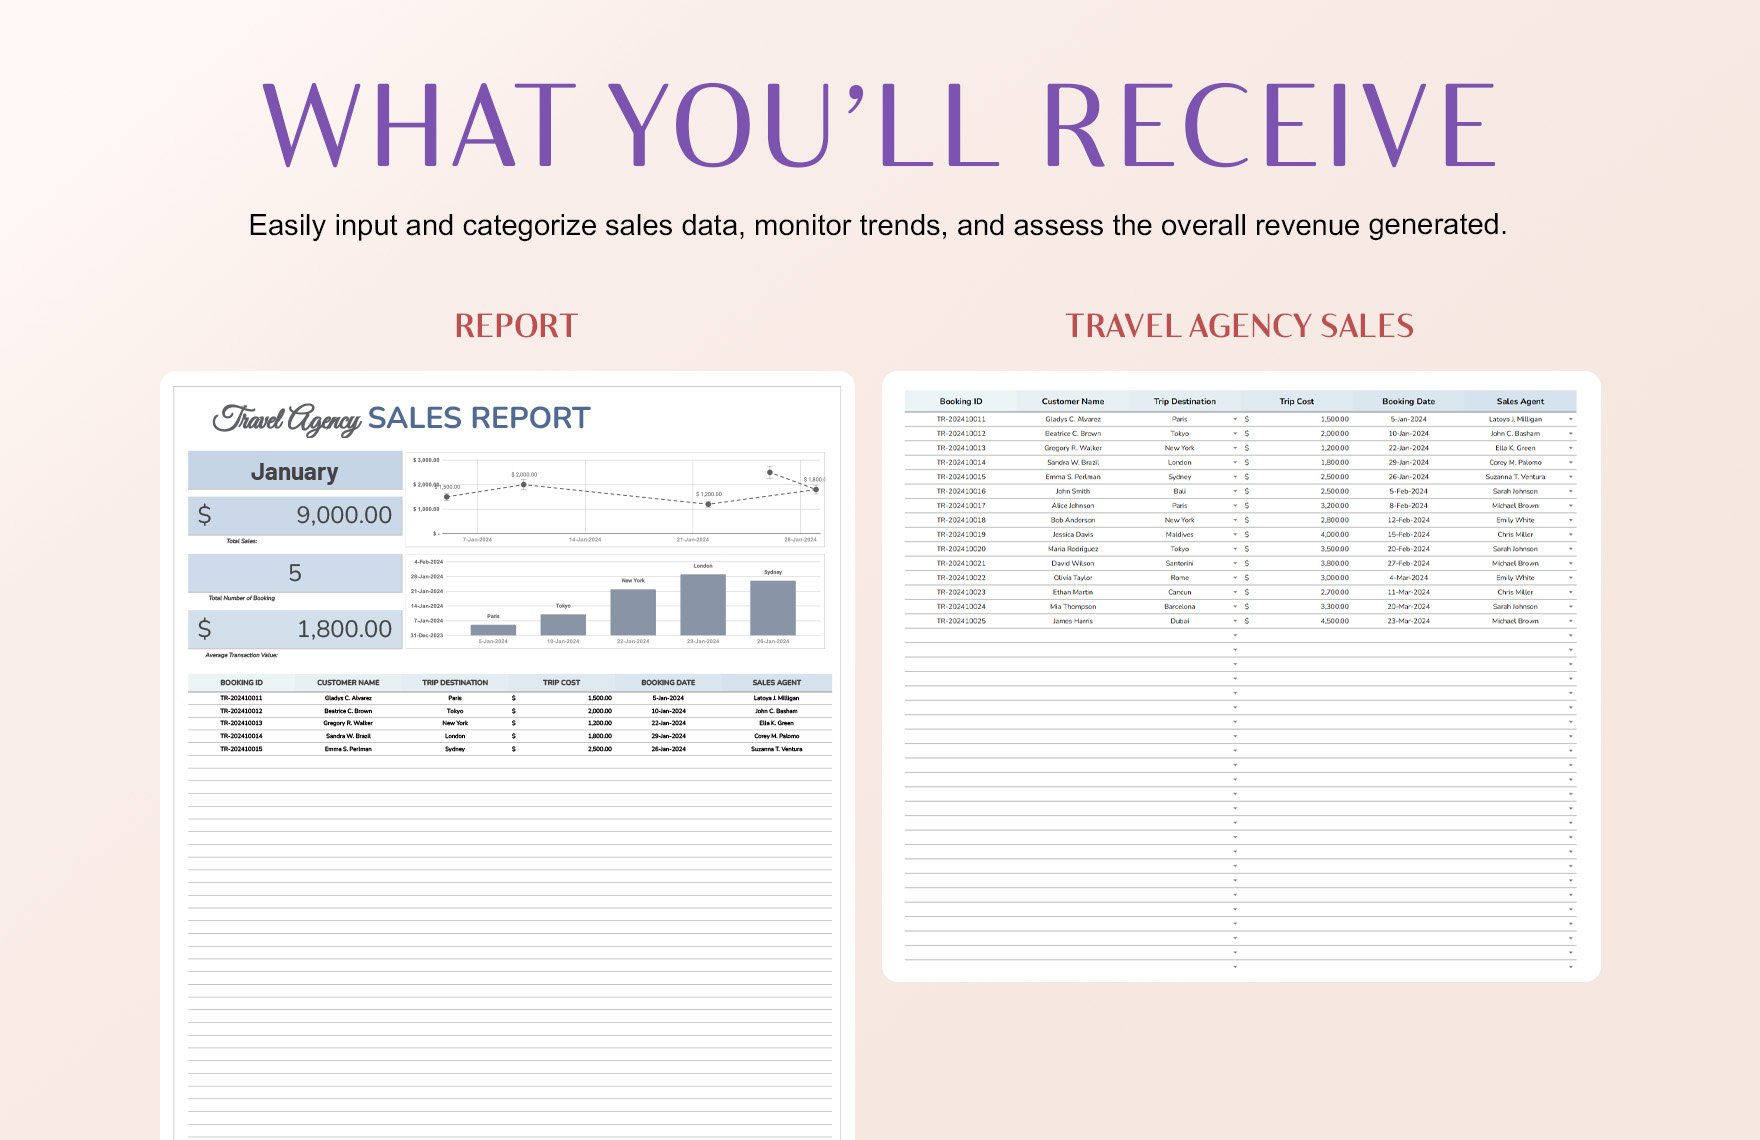 Travel Agency Sales Report Template